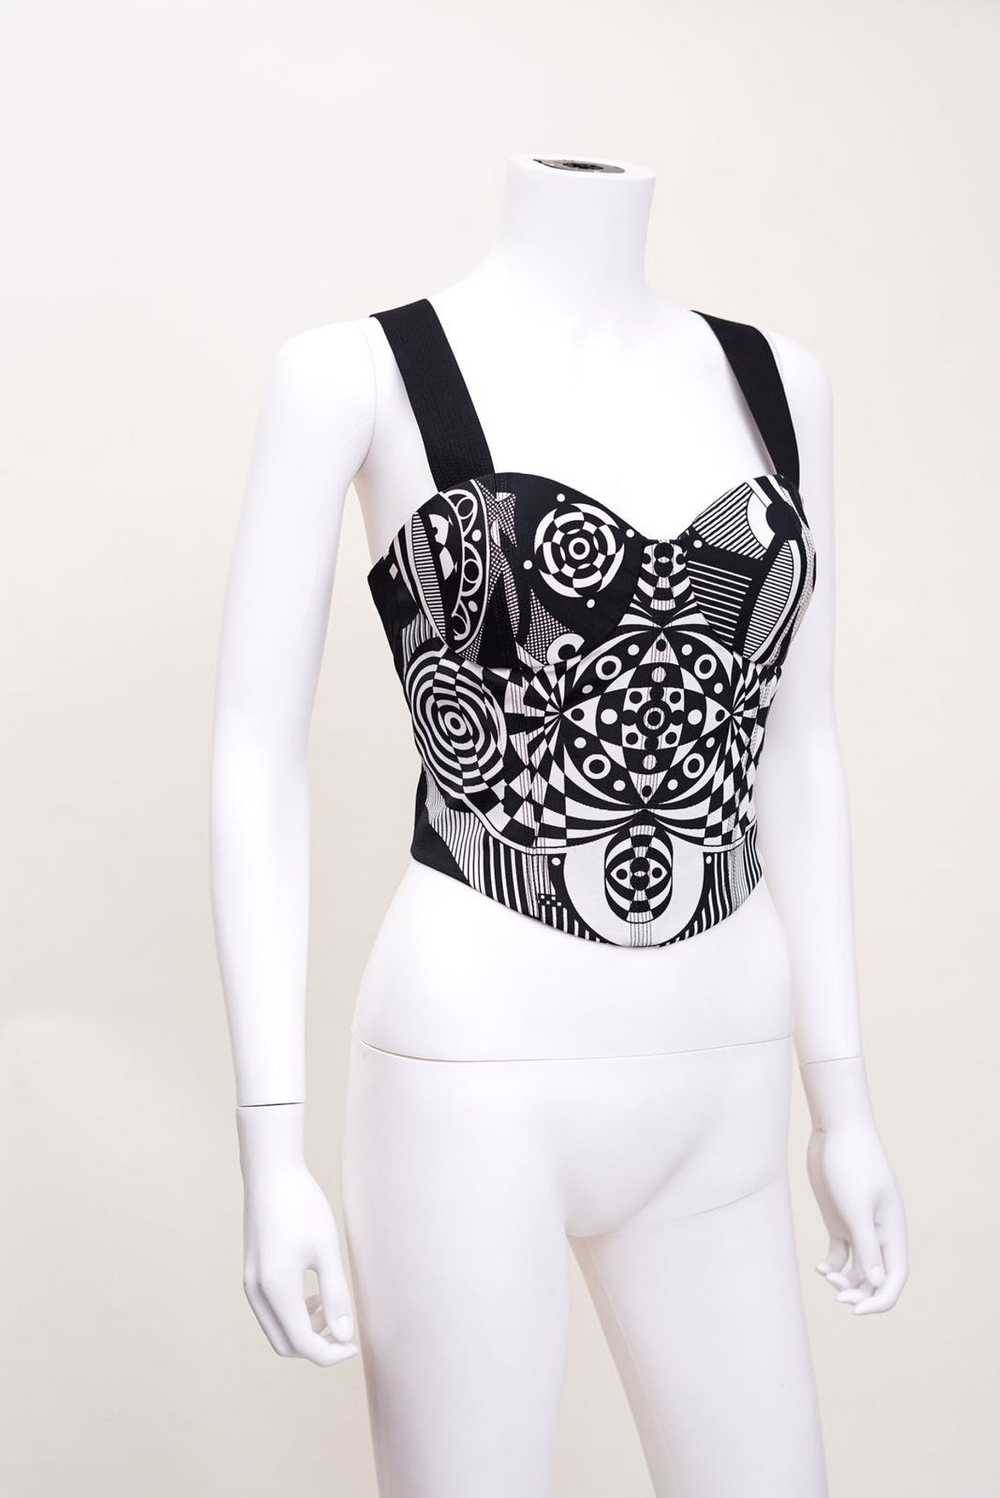 Gianni Versace Gianni Versace 1990’s Vintage Abst… - image 3